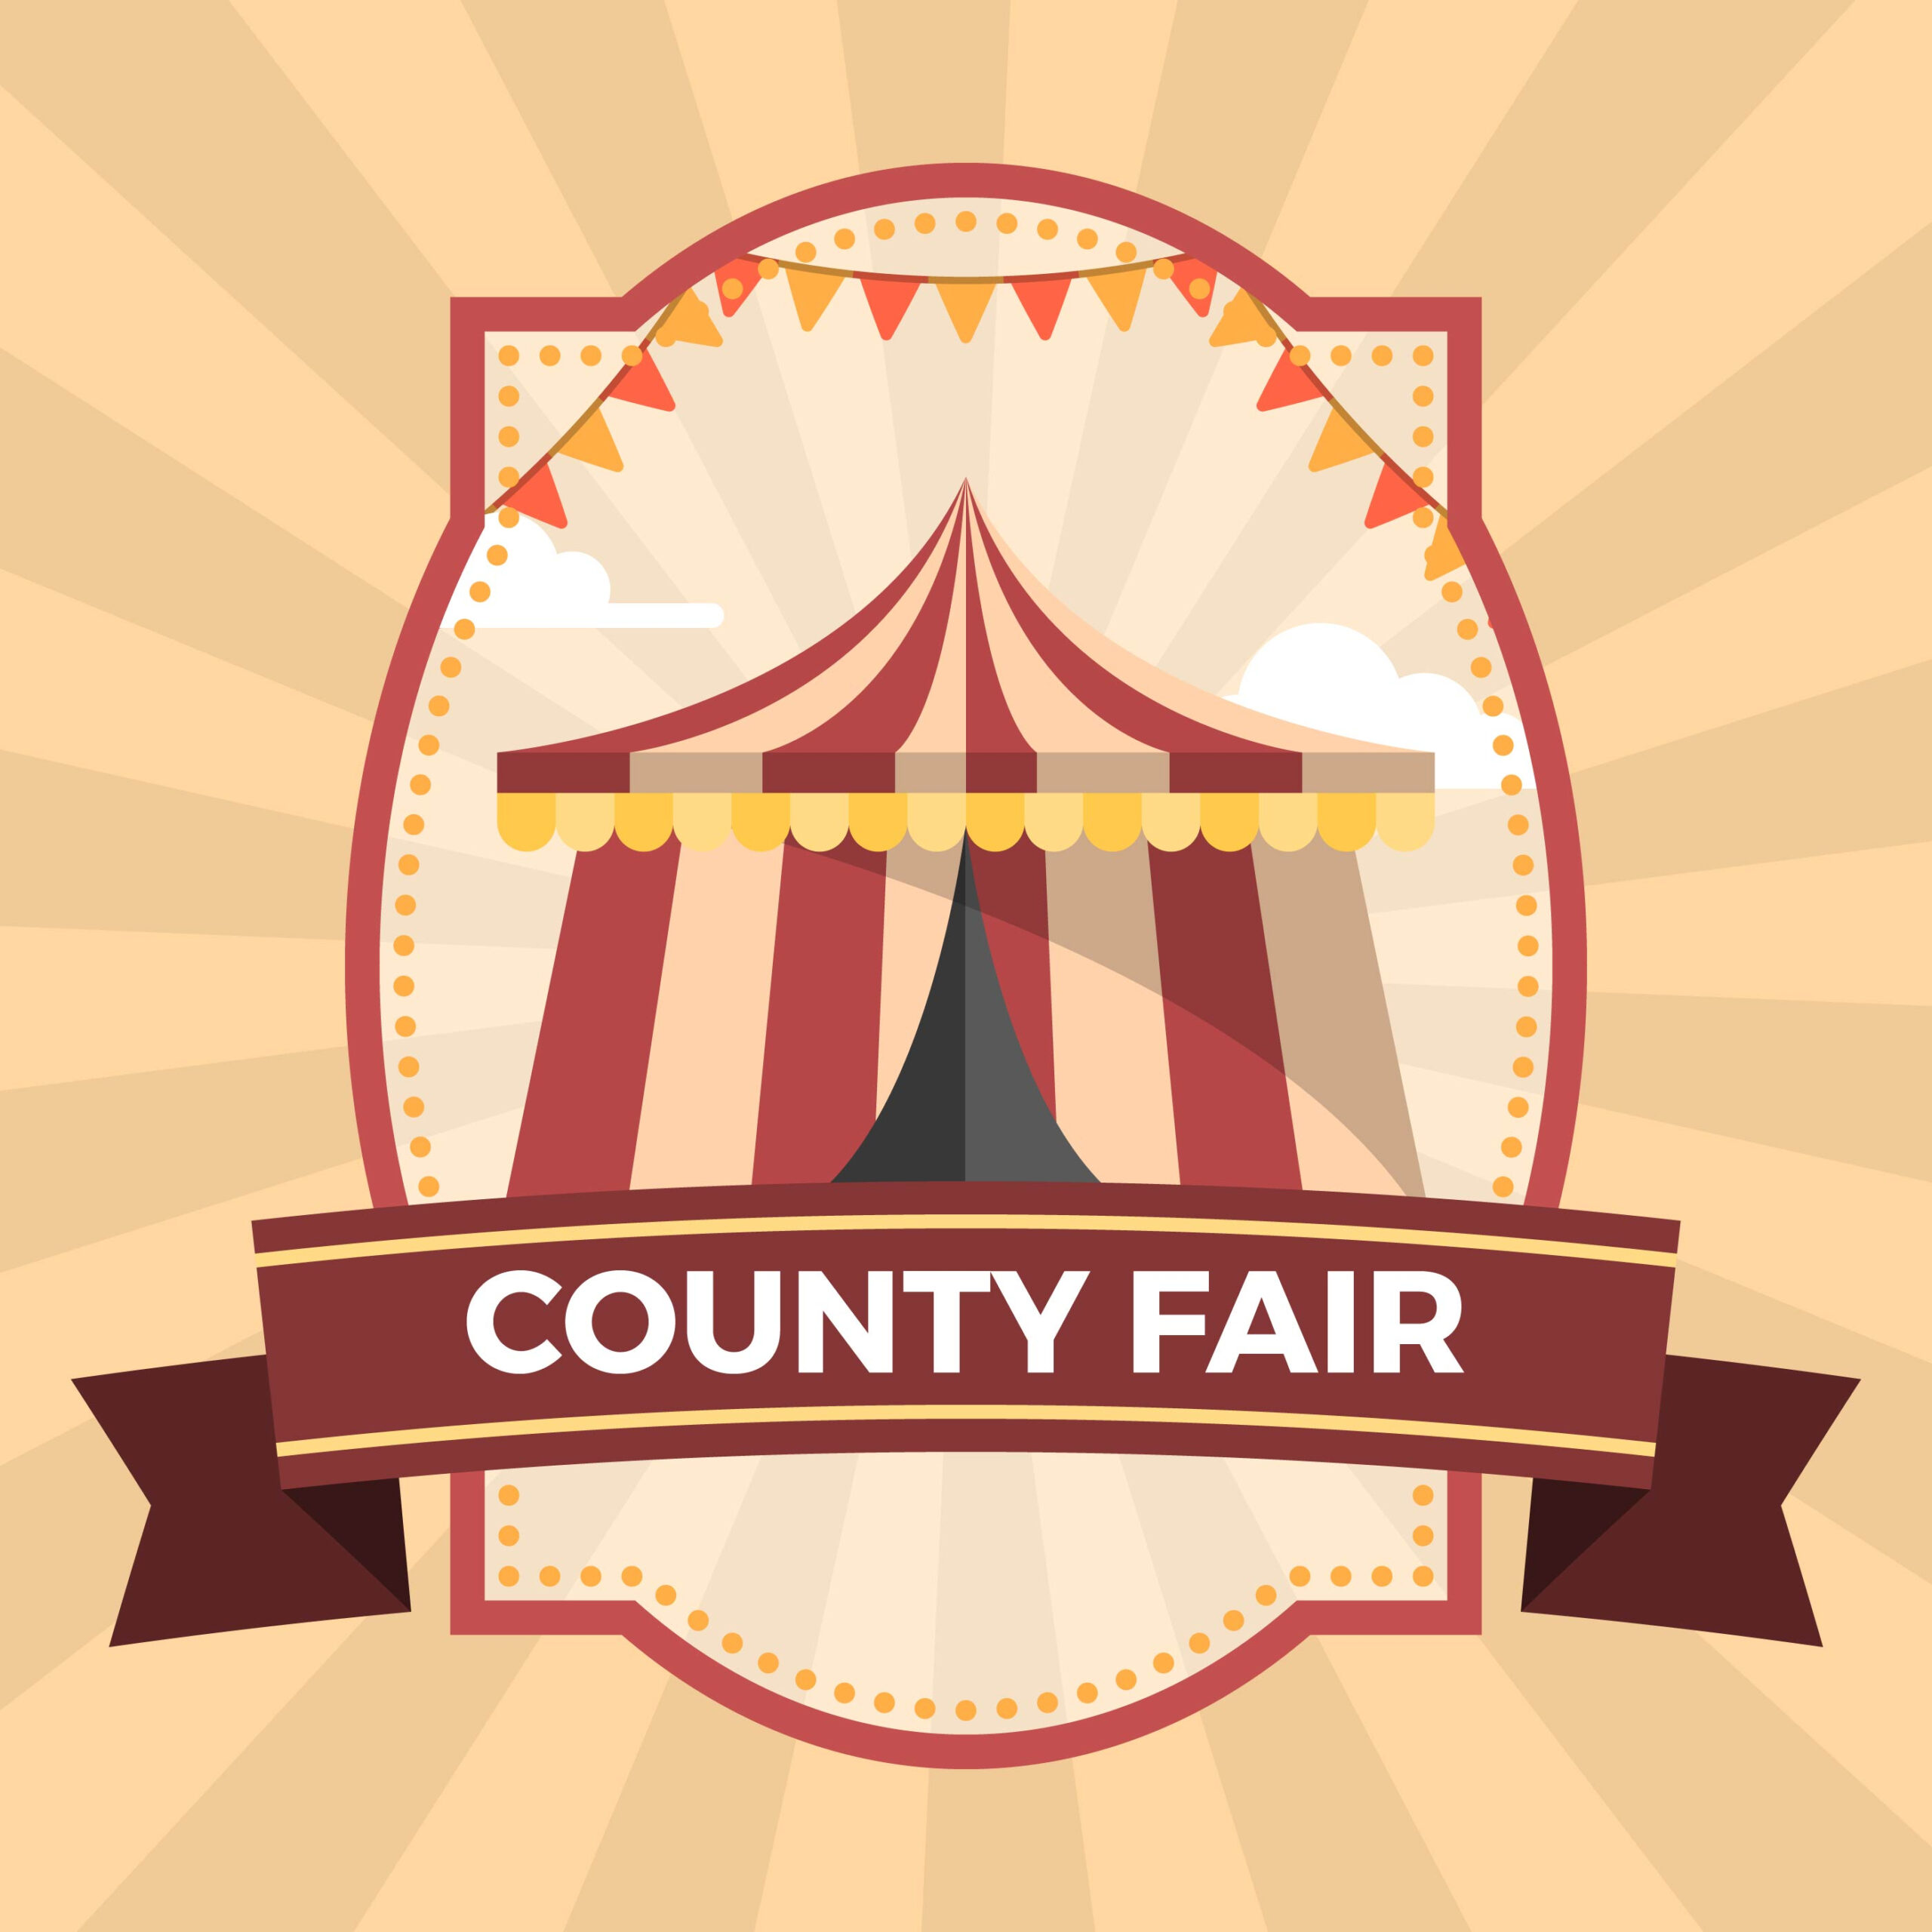 Flaches County Fair Abzeichen Poster Illustration Vorlage 10  Inside County Fair Flyer Template For County Fair Flyer Template